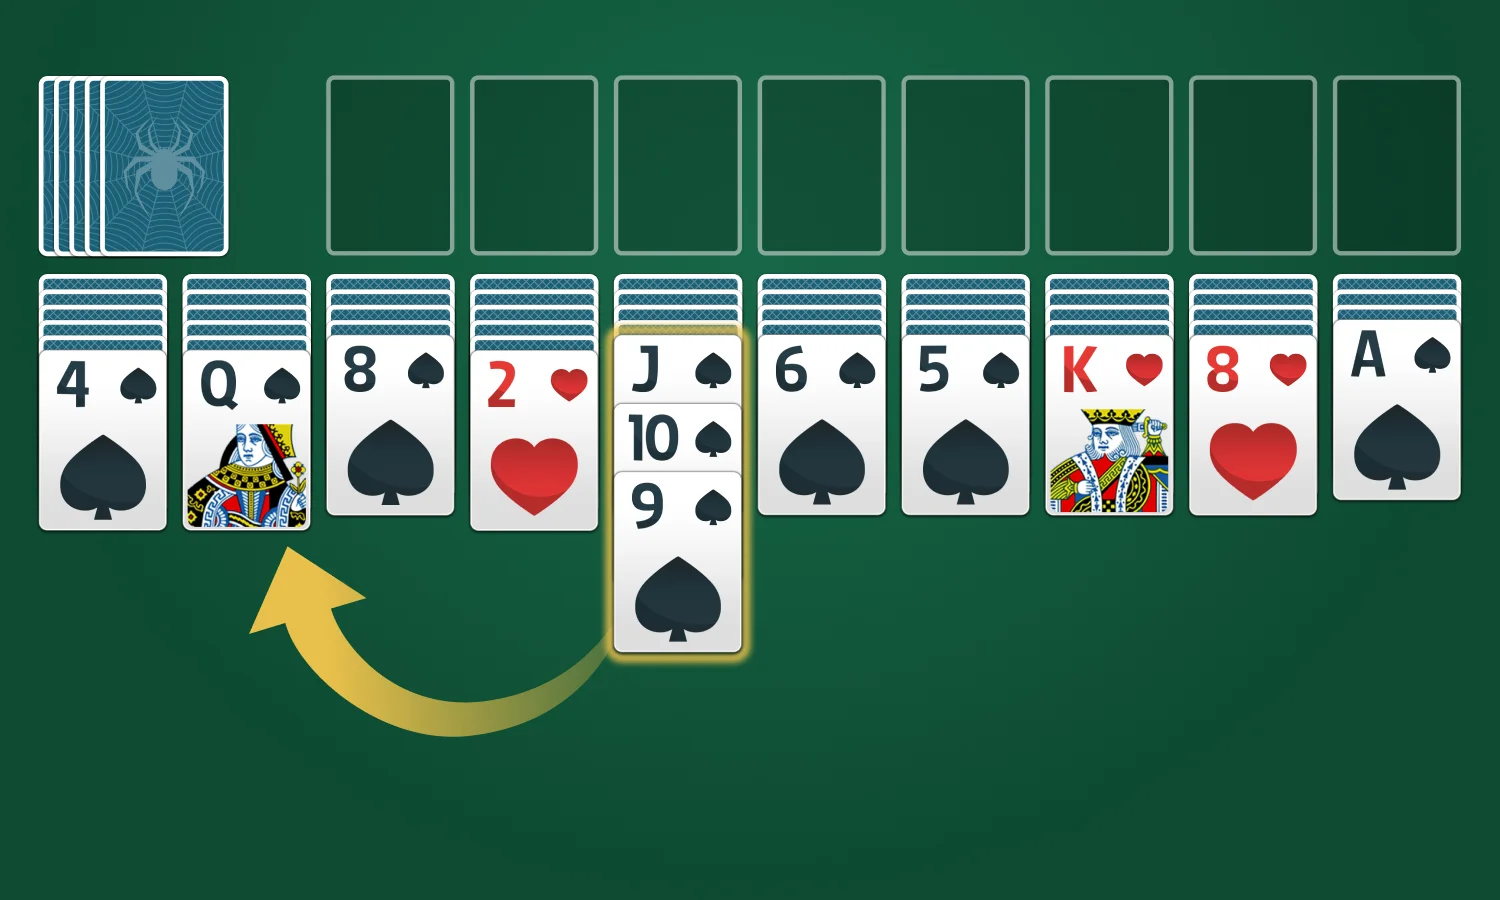 Spider Solitaire Rules: Move Cards Around the Tableau